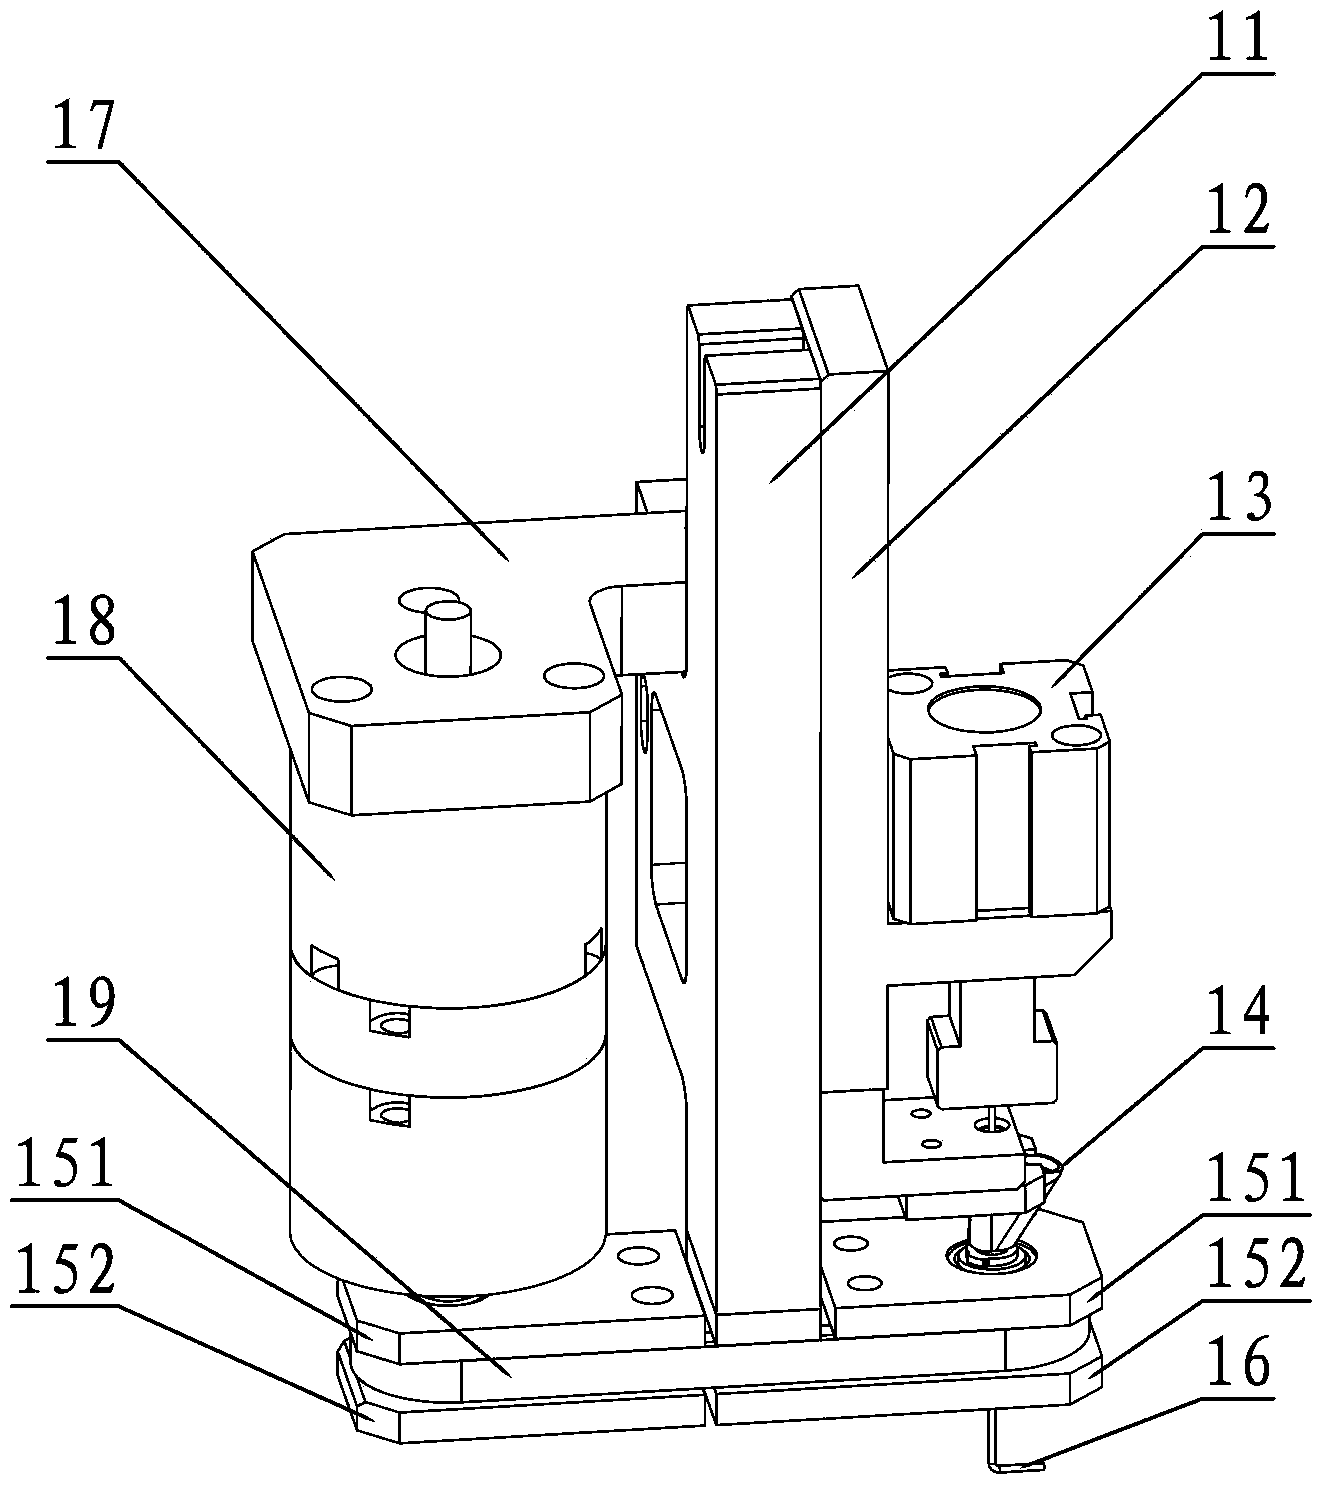 Curved pinhead rotary positioning device for dispensing